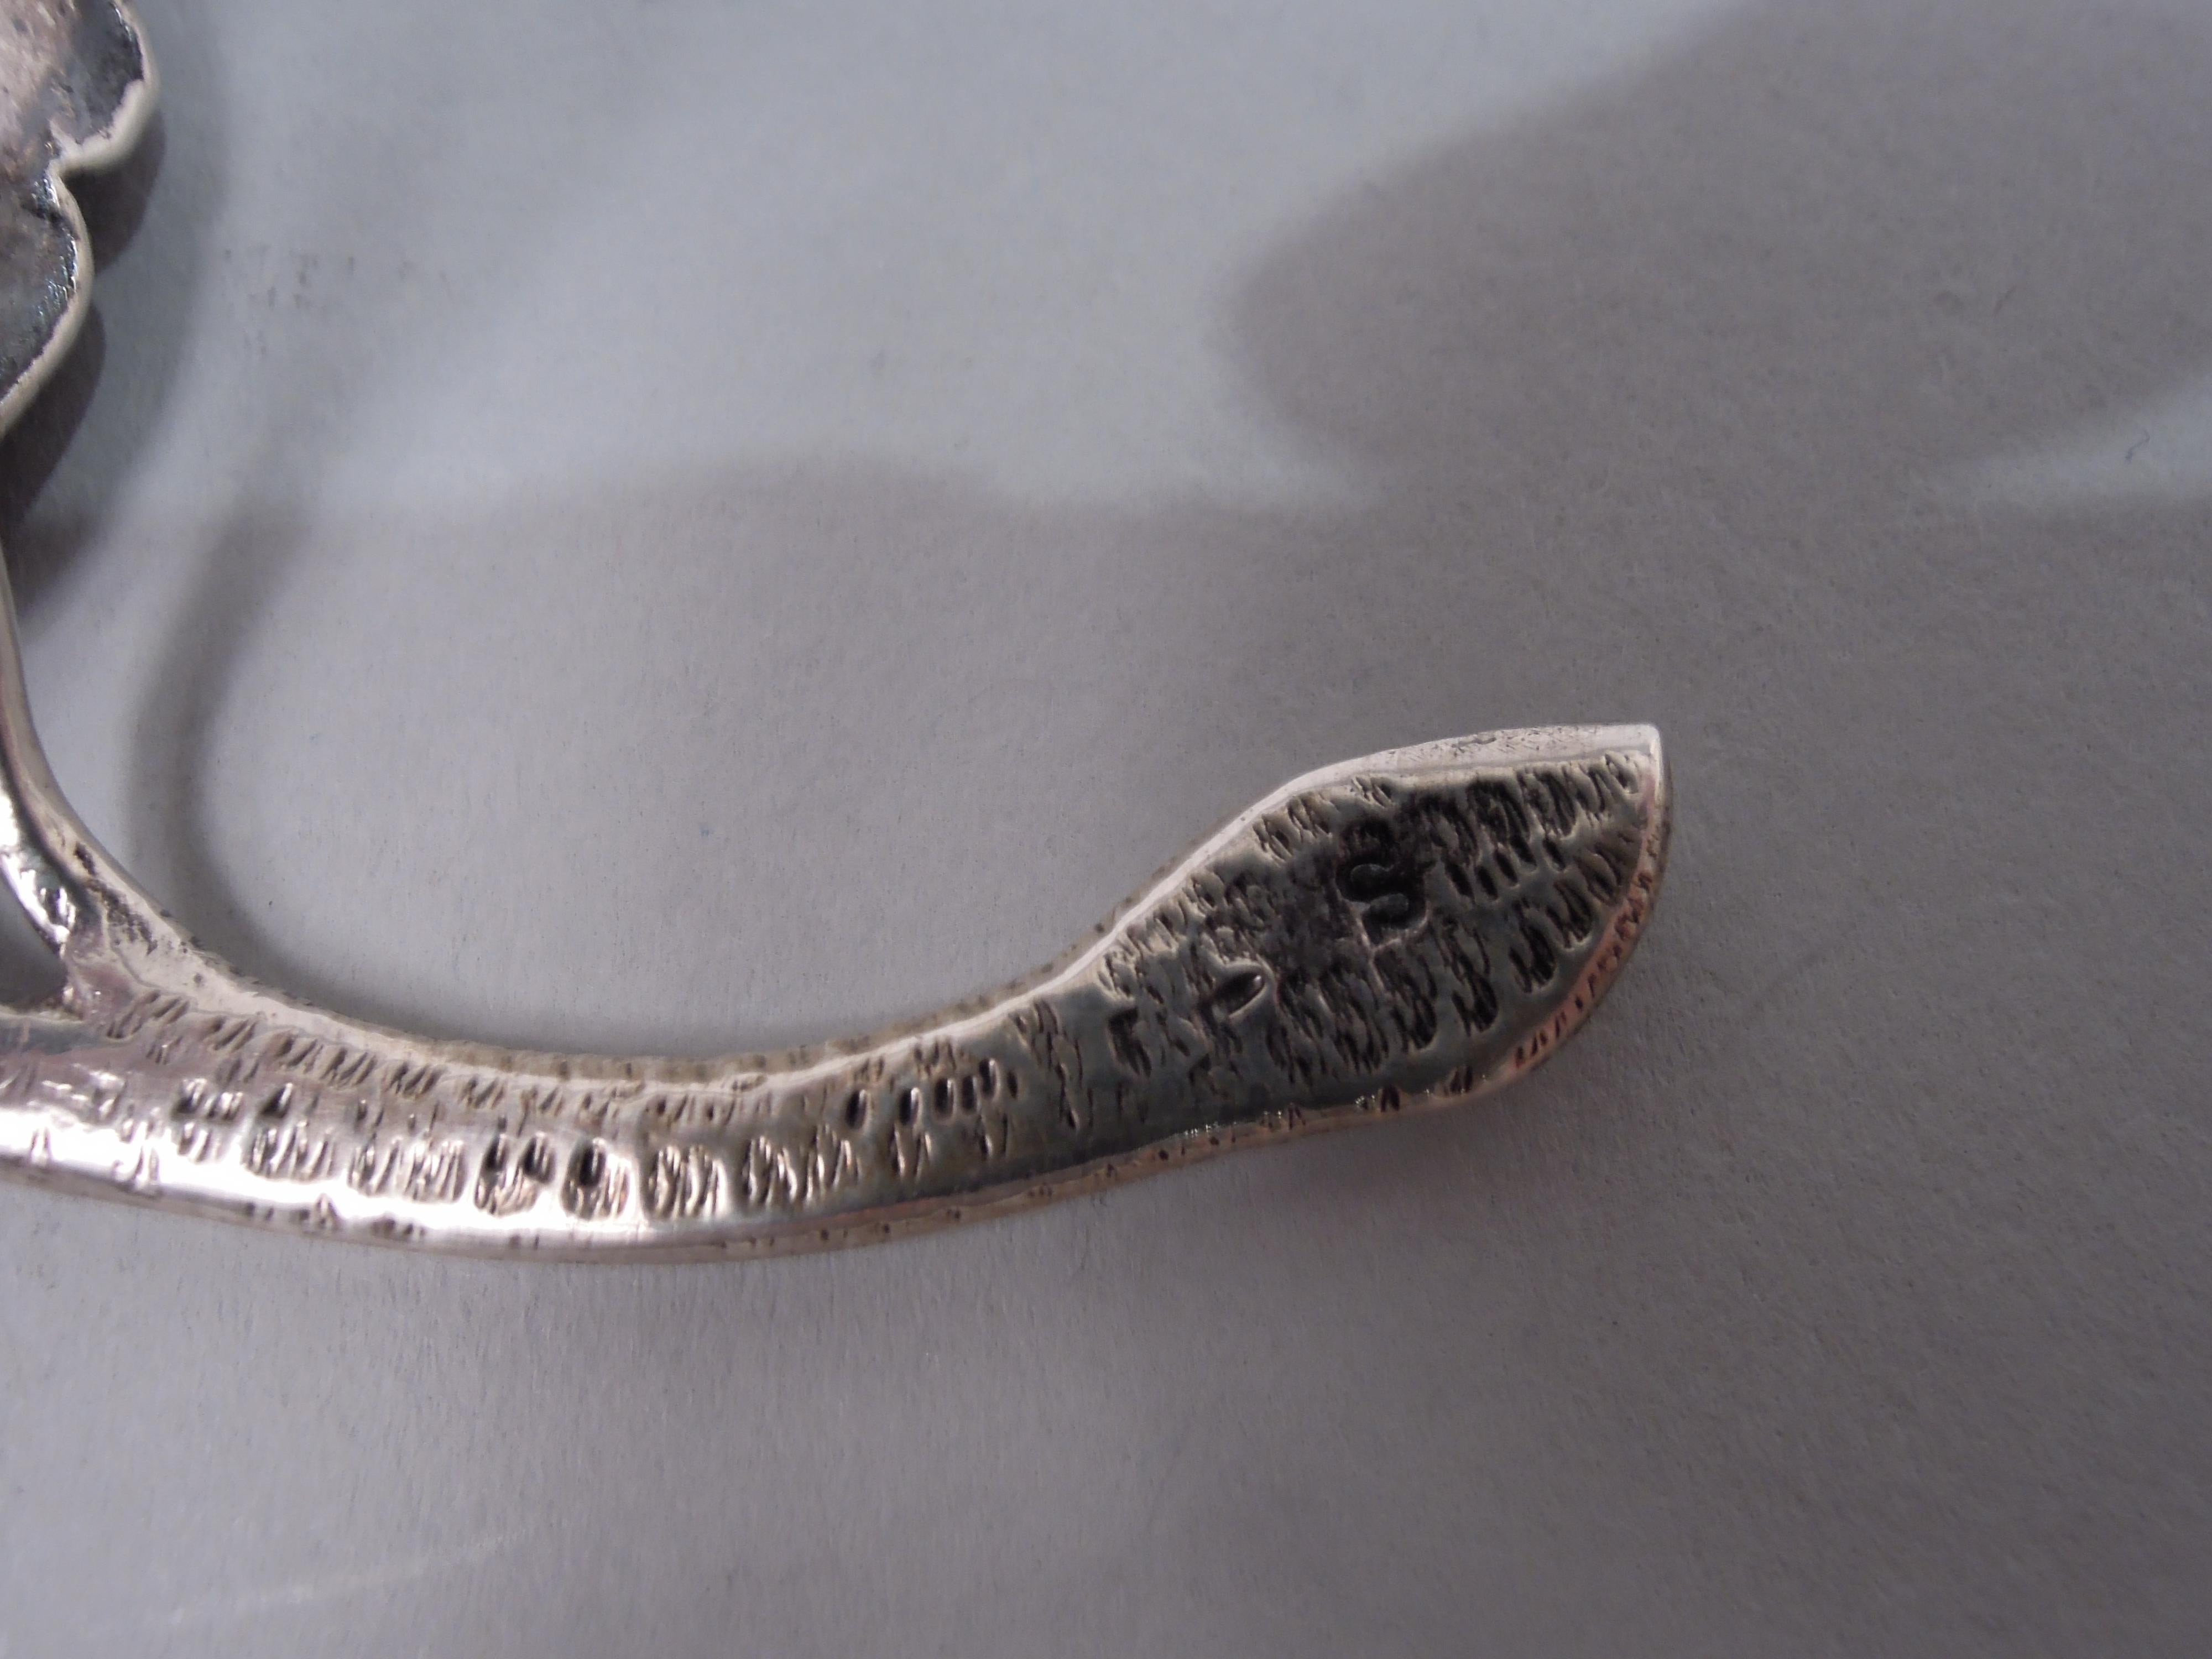 19th Century Antique German Silver Tea Scoop with English Sterling Import Marks